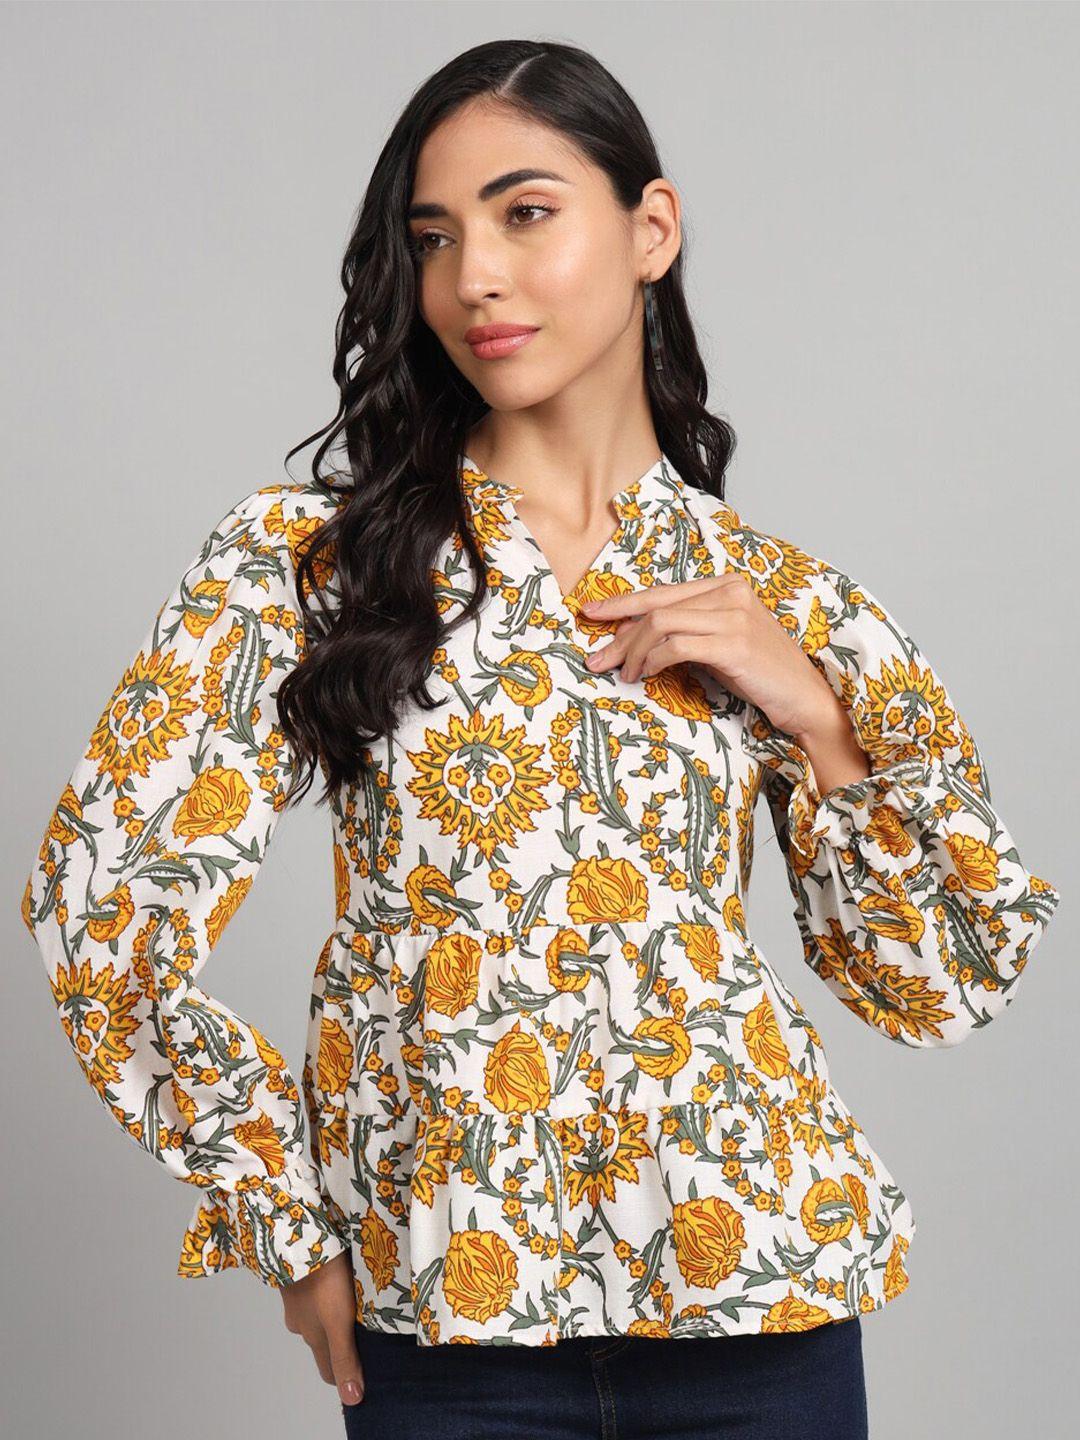 the dry state off white & yellow floral print bishop sleeves peplum top